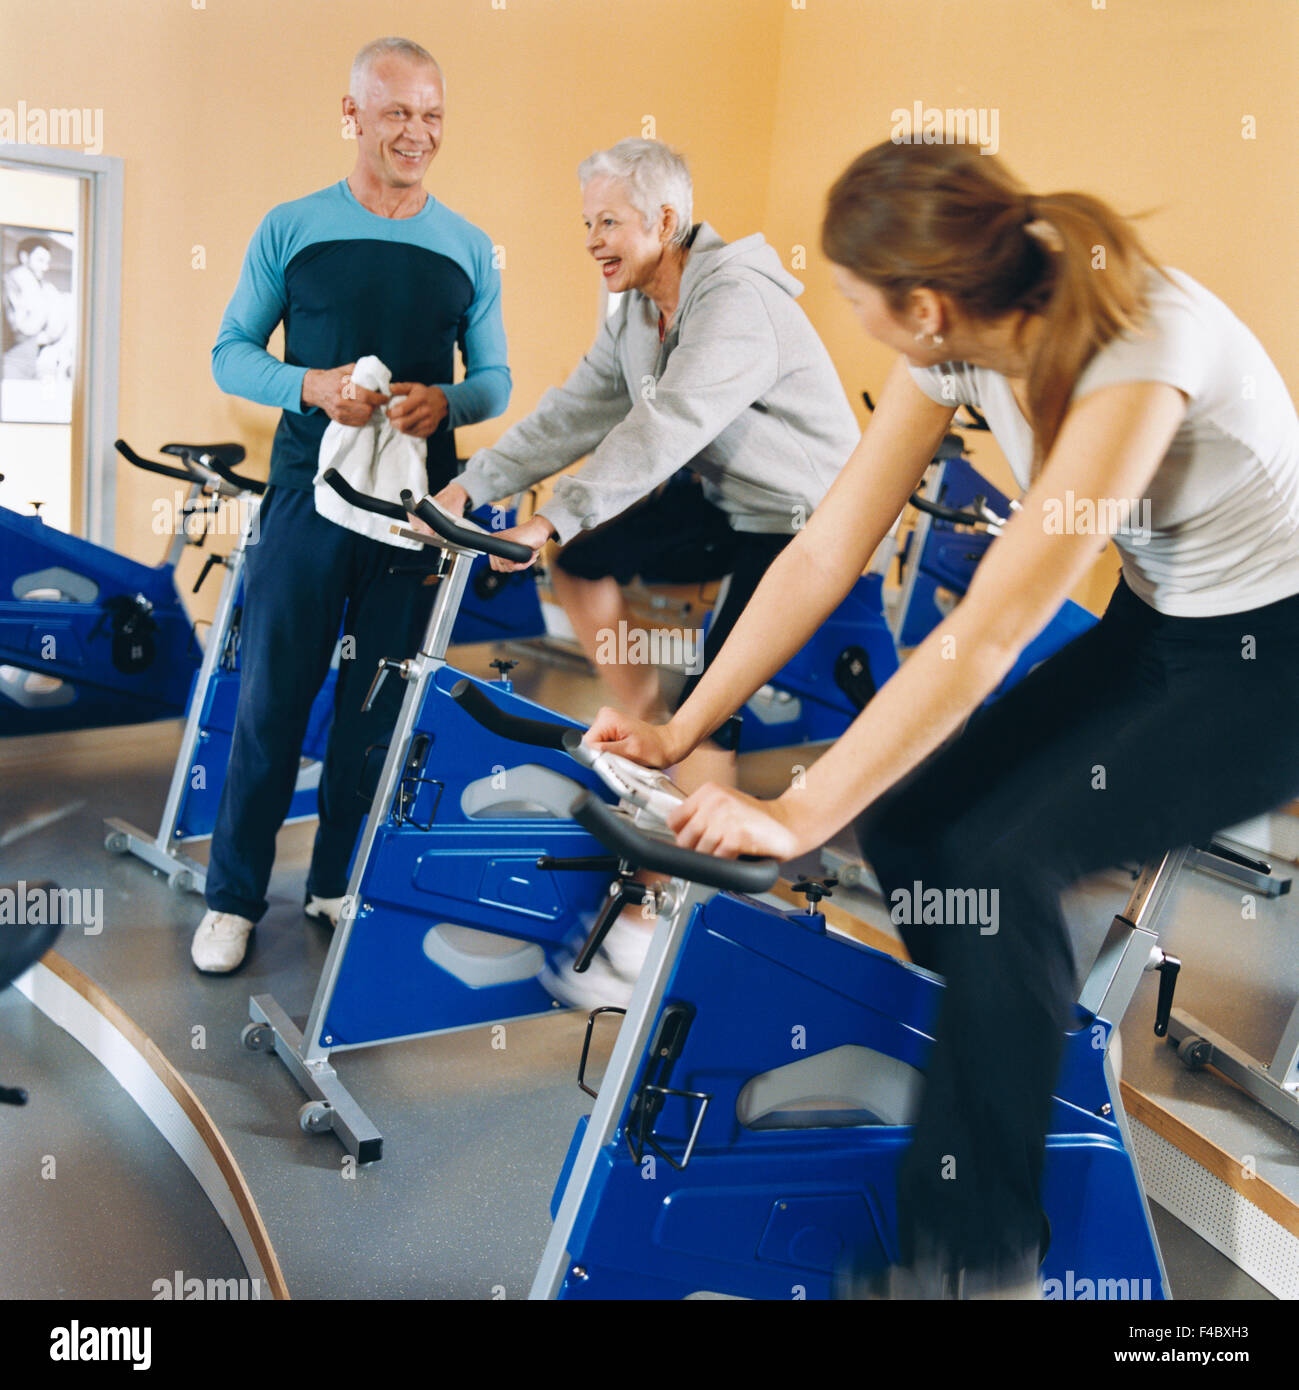 70-74 years 75-79 years activity adults only athlete bicycle bodybuilding color image elderly man elderly woman exercising gym Stock Photo